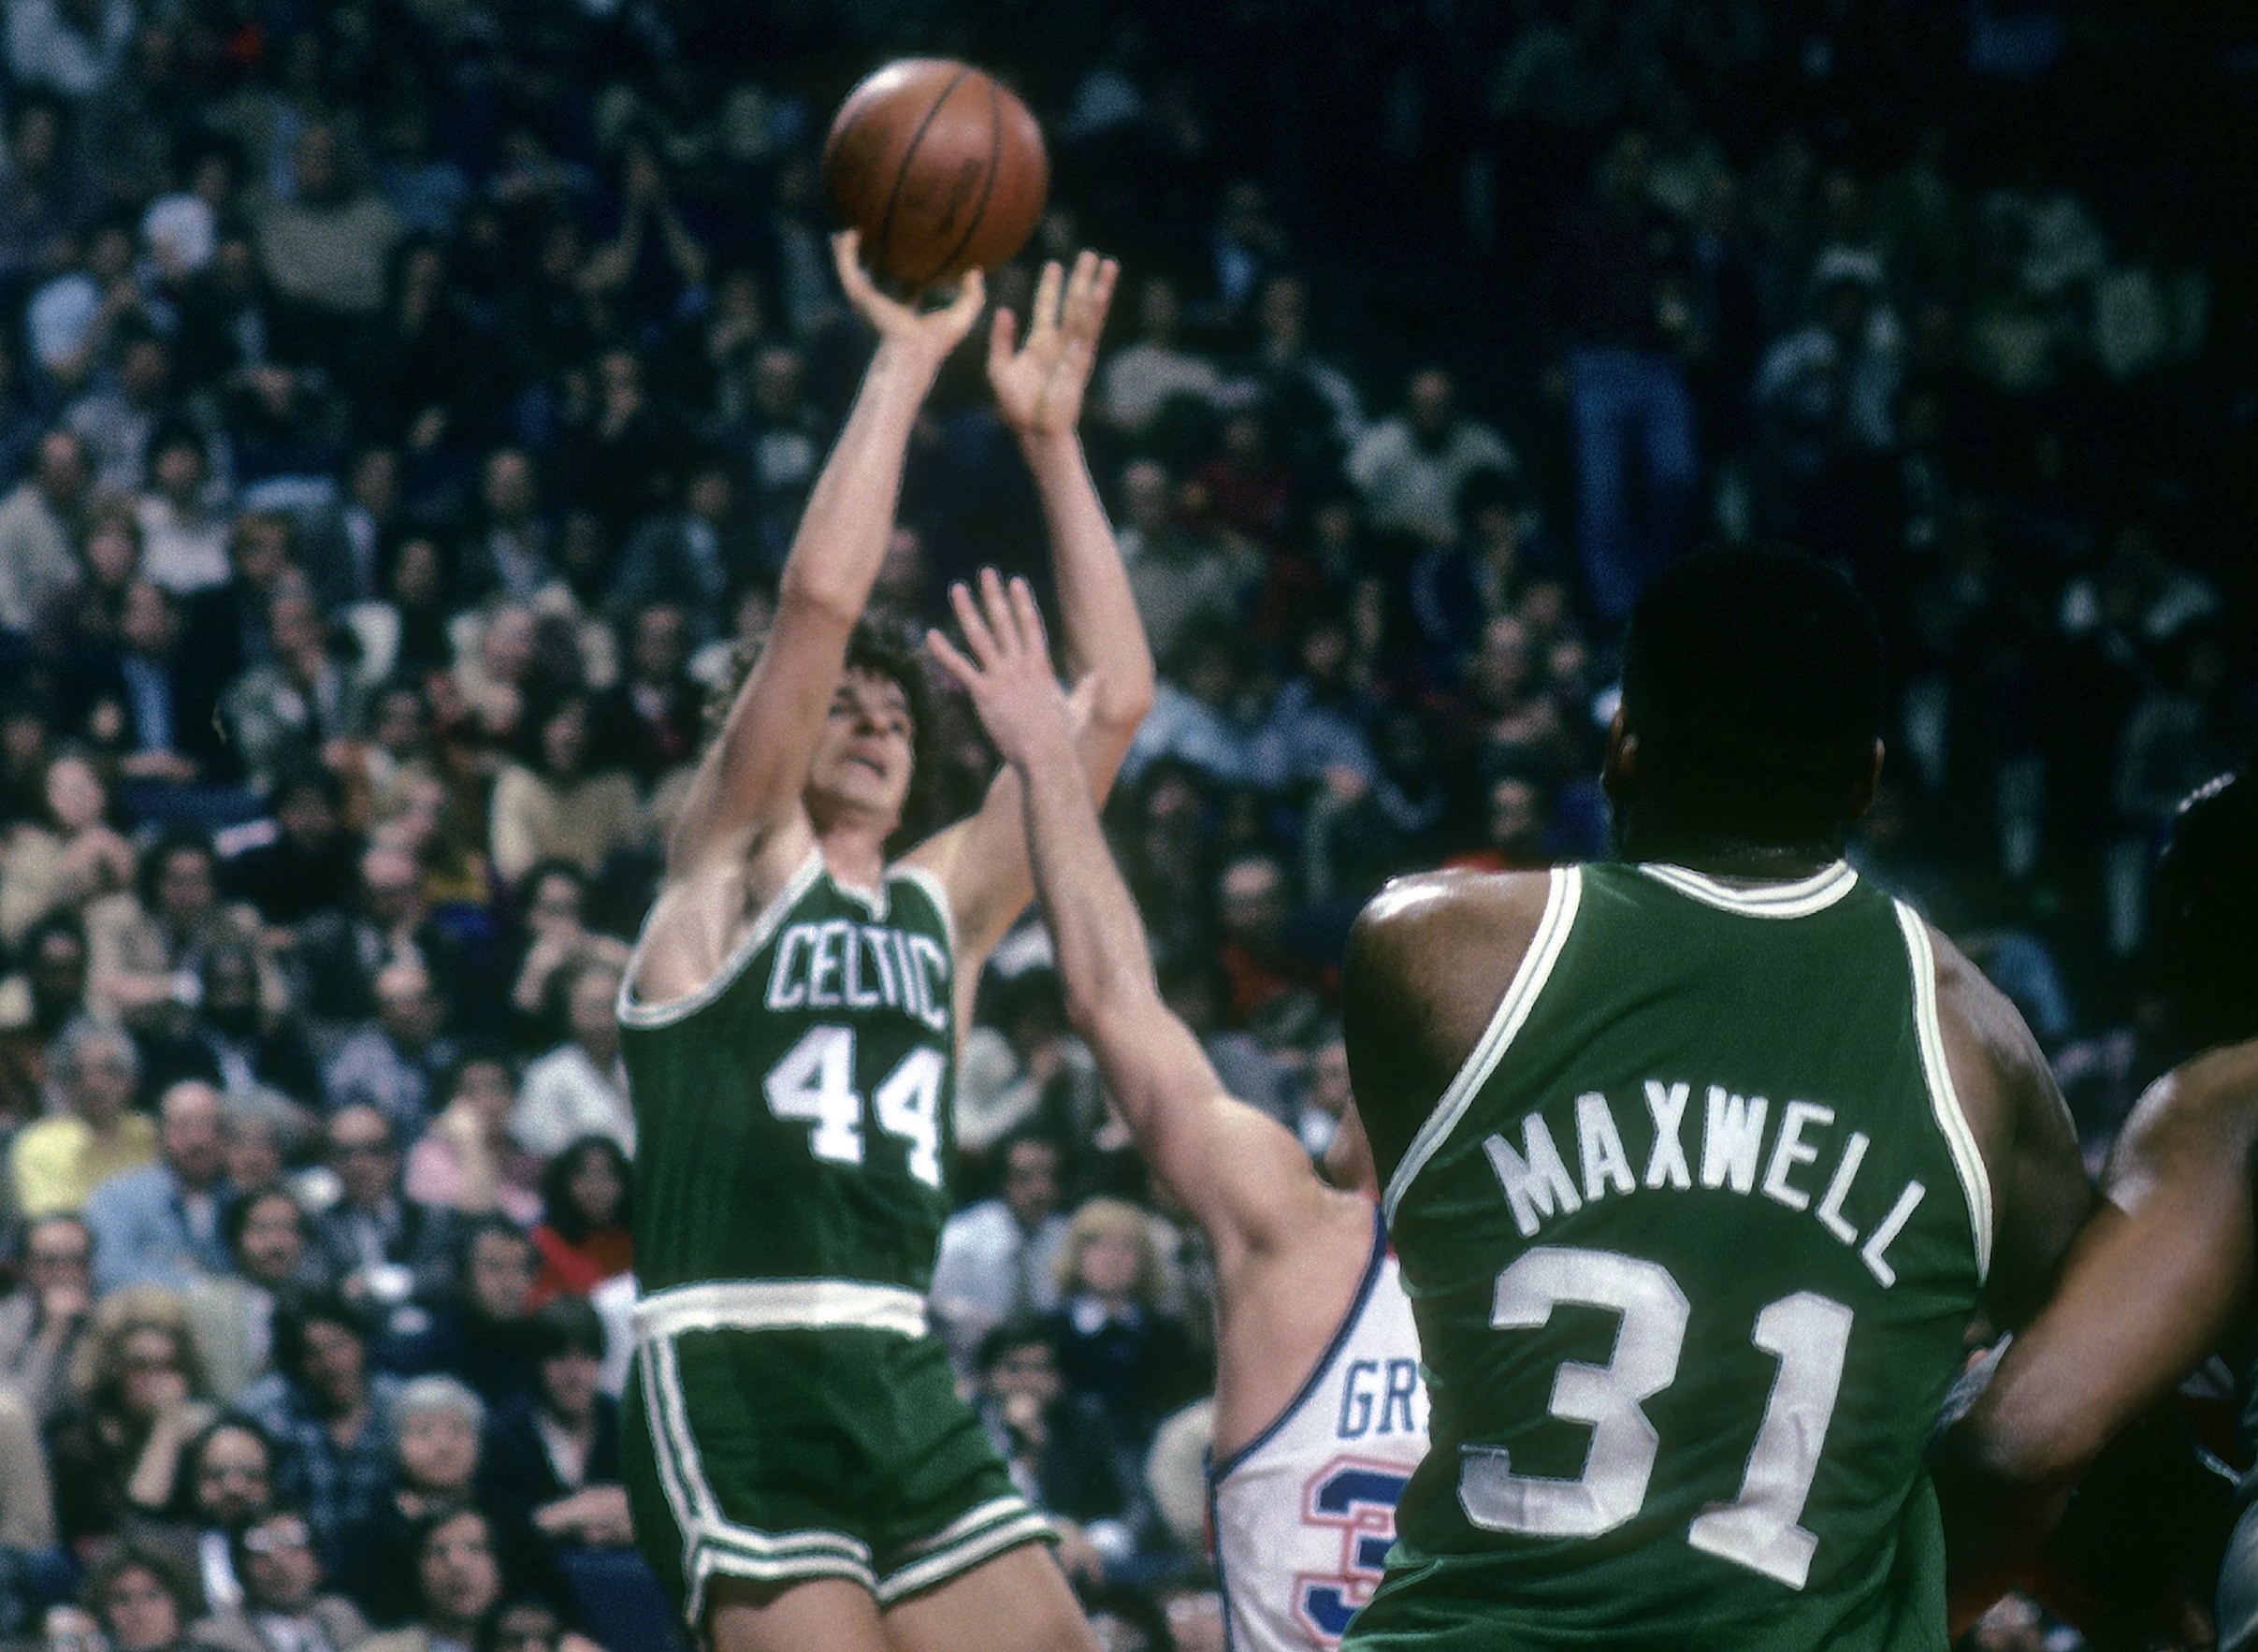 Pete Maravich Played Just 26 Games With the Boston Celtics but Had a Heated Moment With Teammate Larry Bird